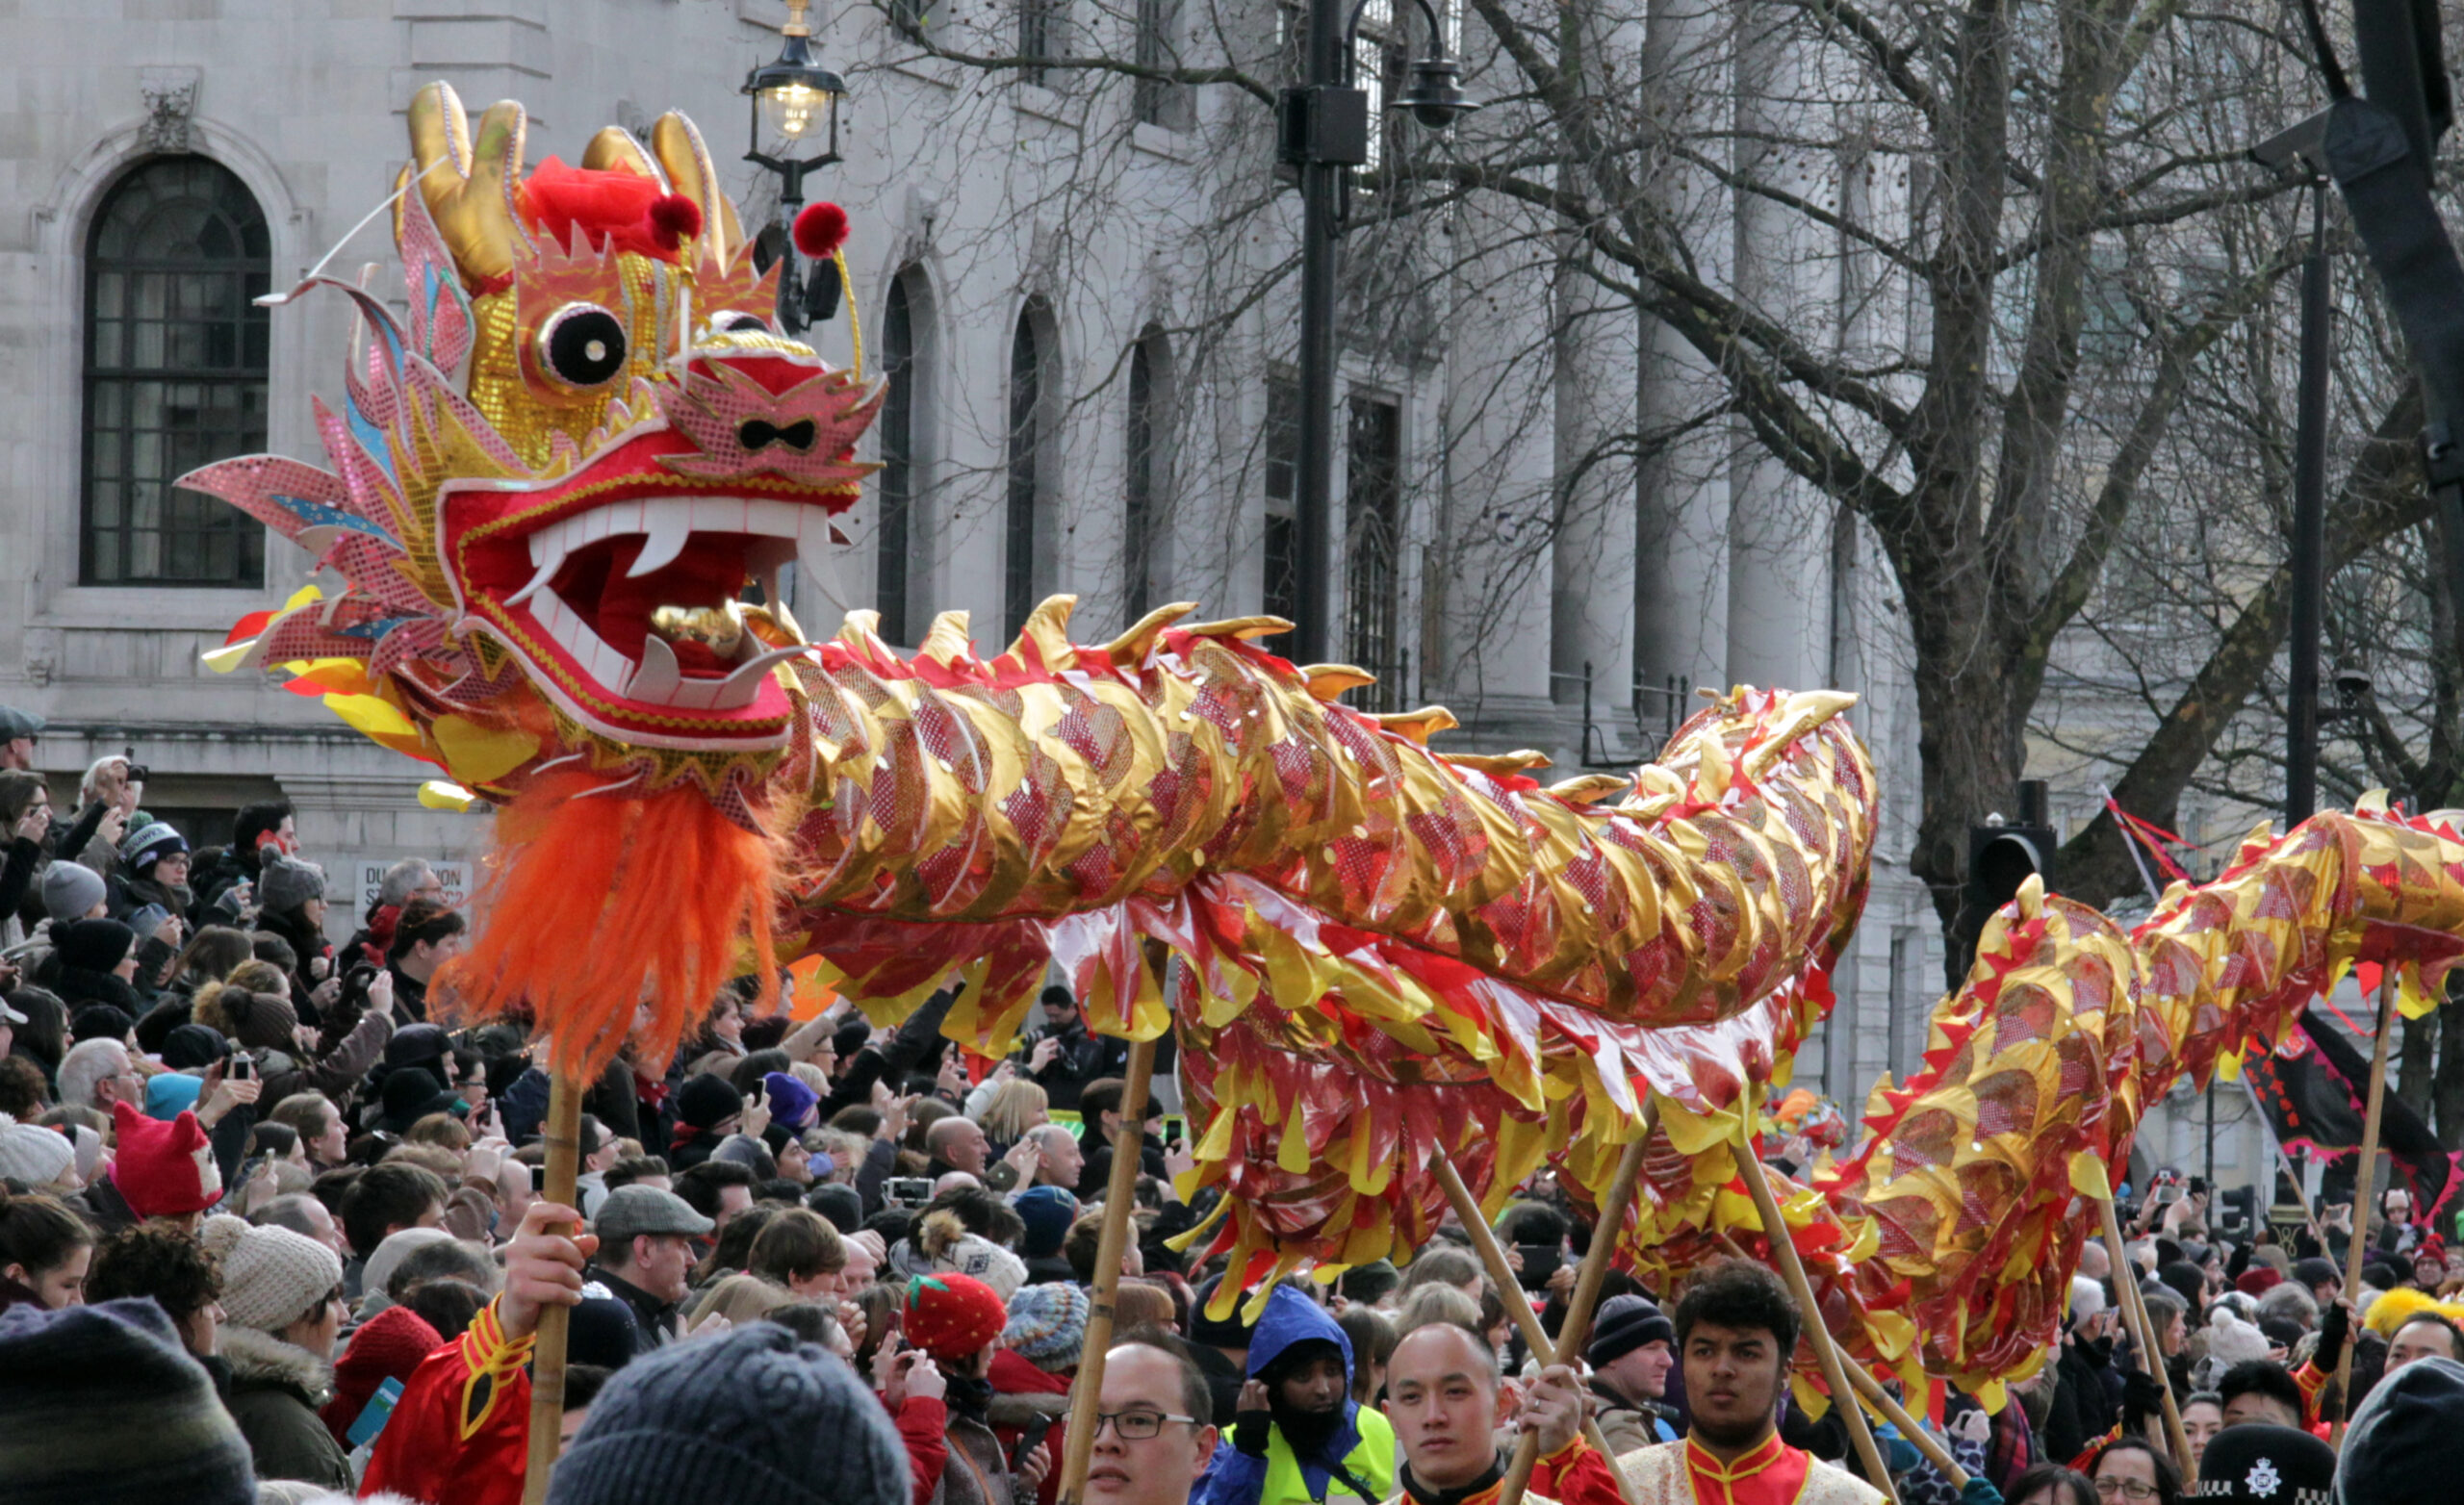 A colossal cloth dragon weaves its way through the crowds at London's Trafalgar Square as part of the Chinese New Year parade.